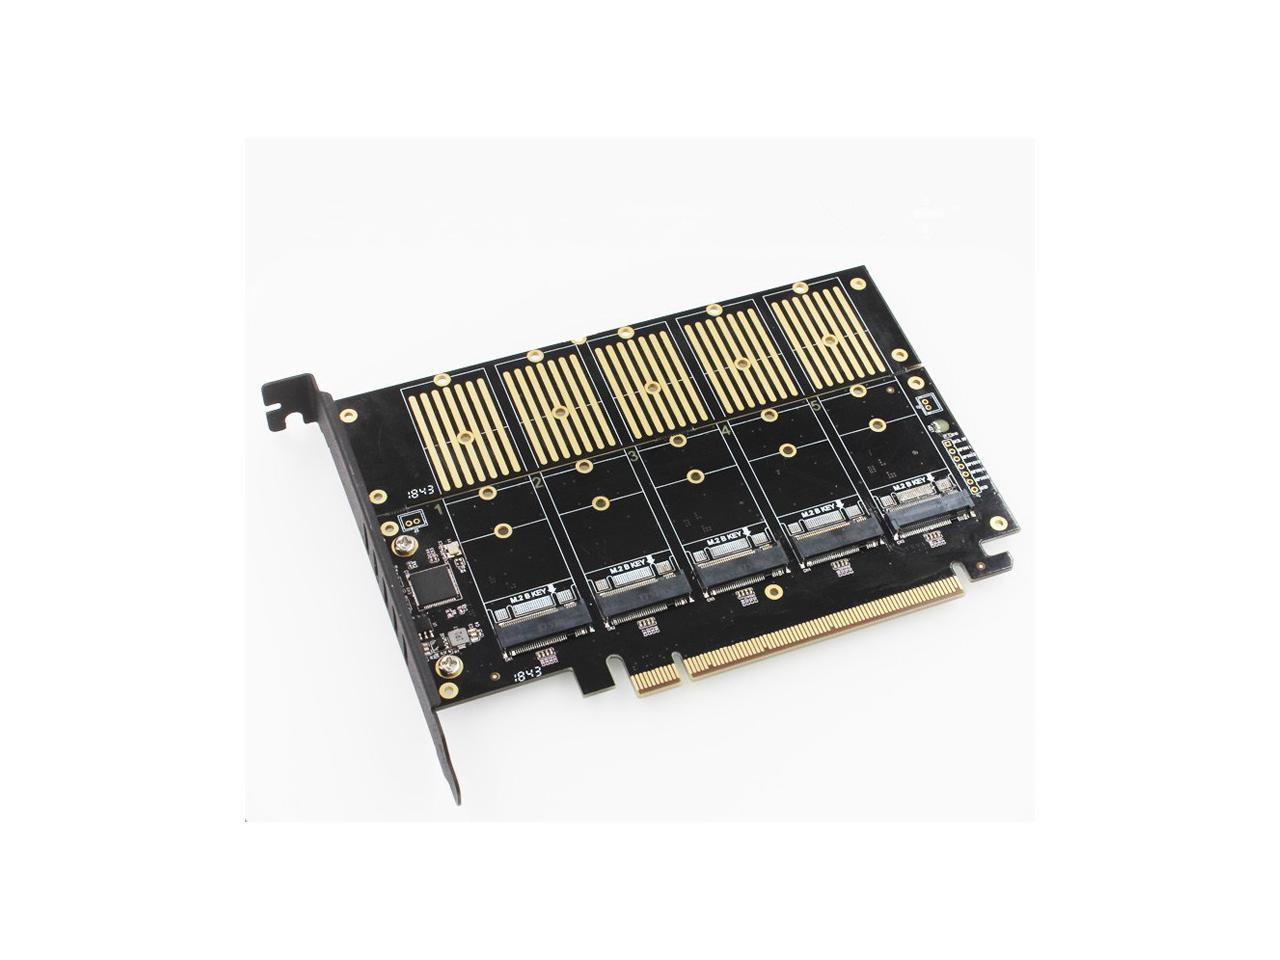 5 Port SATA PCI-E (B-KEY) Gen3X2 SSD to PCI-E X16 Adapter Expansion Card (SSD not included) PCIE3.0 X2 16Gbps Bandwidth - Newegg.com